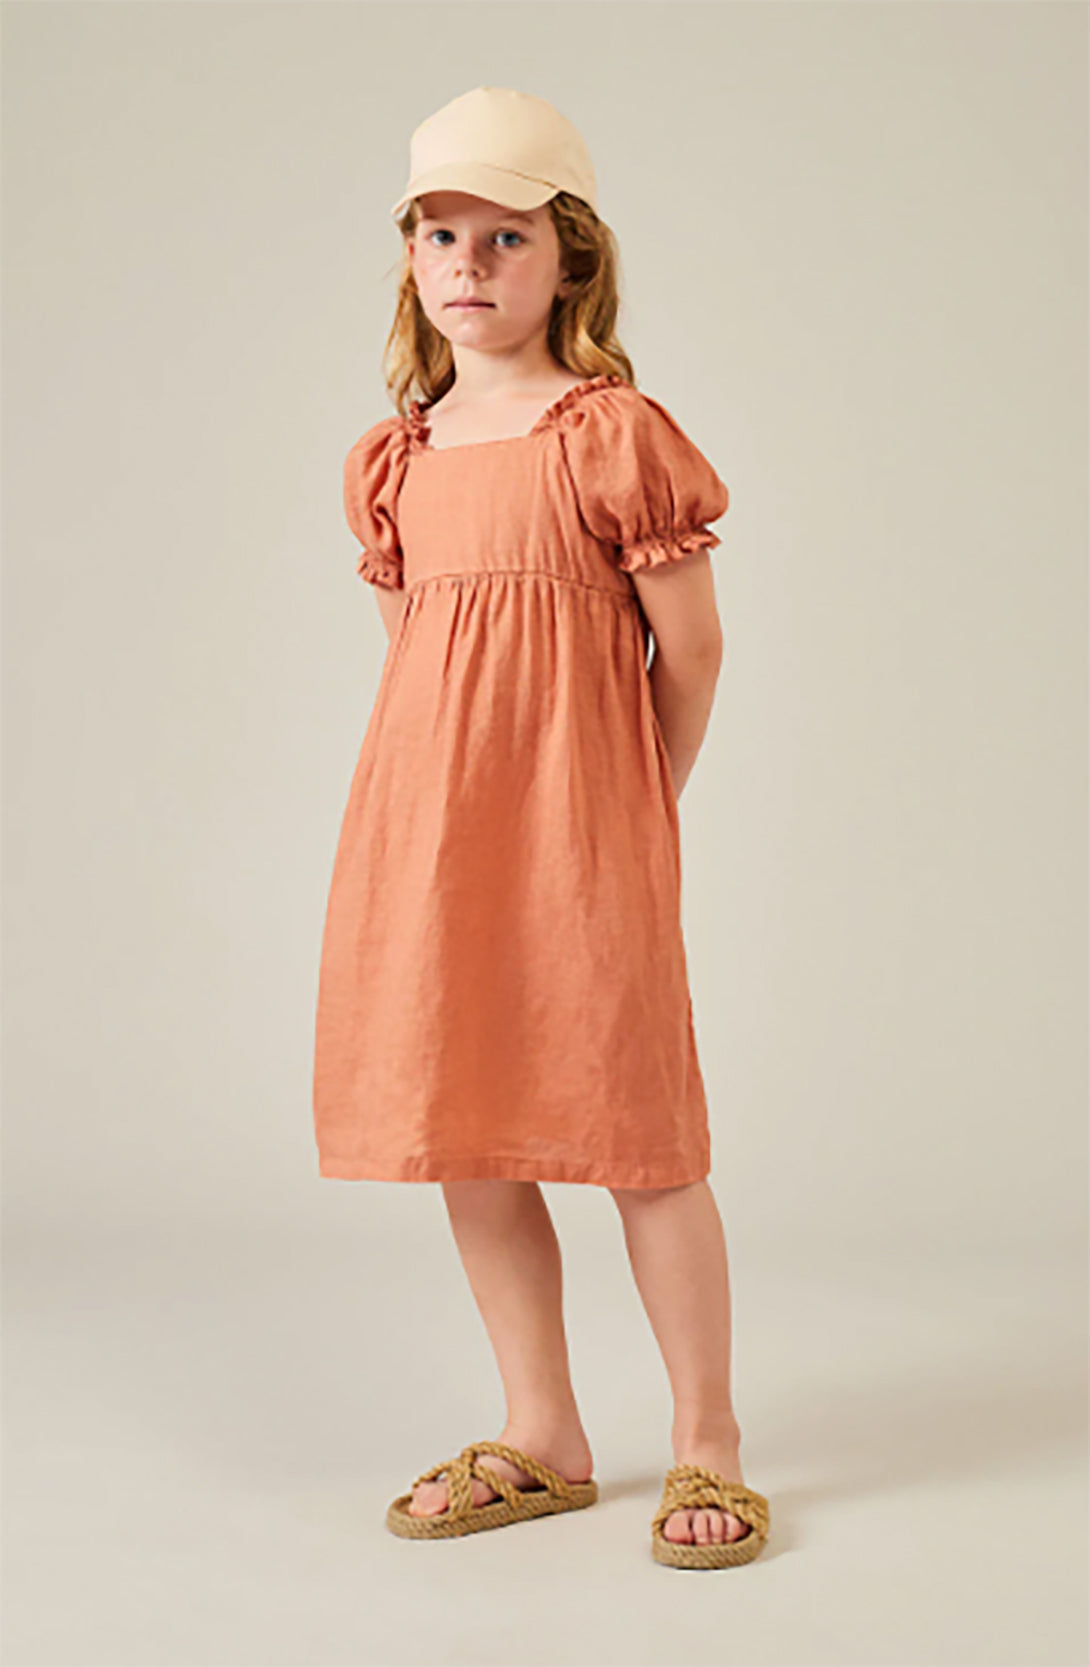 【my little cozmo】【40％off】Linen dress Anthracite　リネンワンピース 4Y,6Y,8Y　  | Coucoubebe/ククベベ